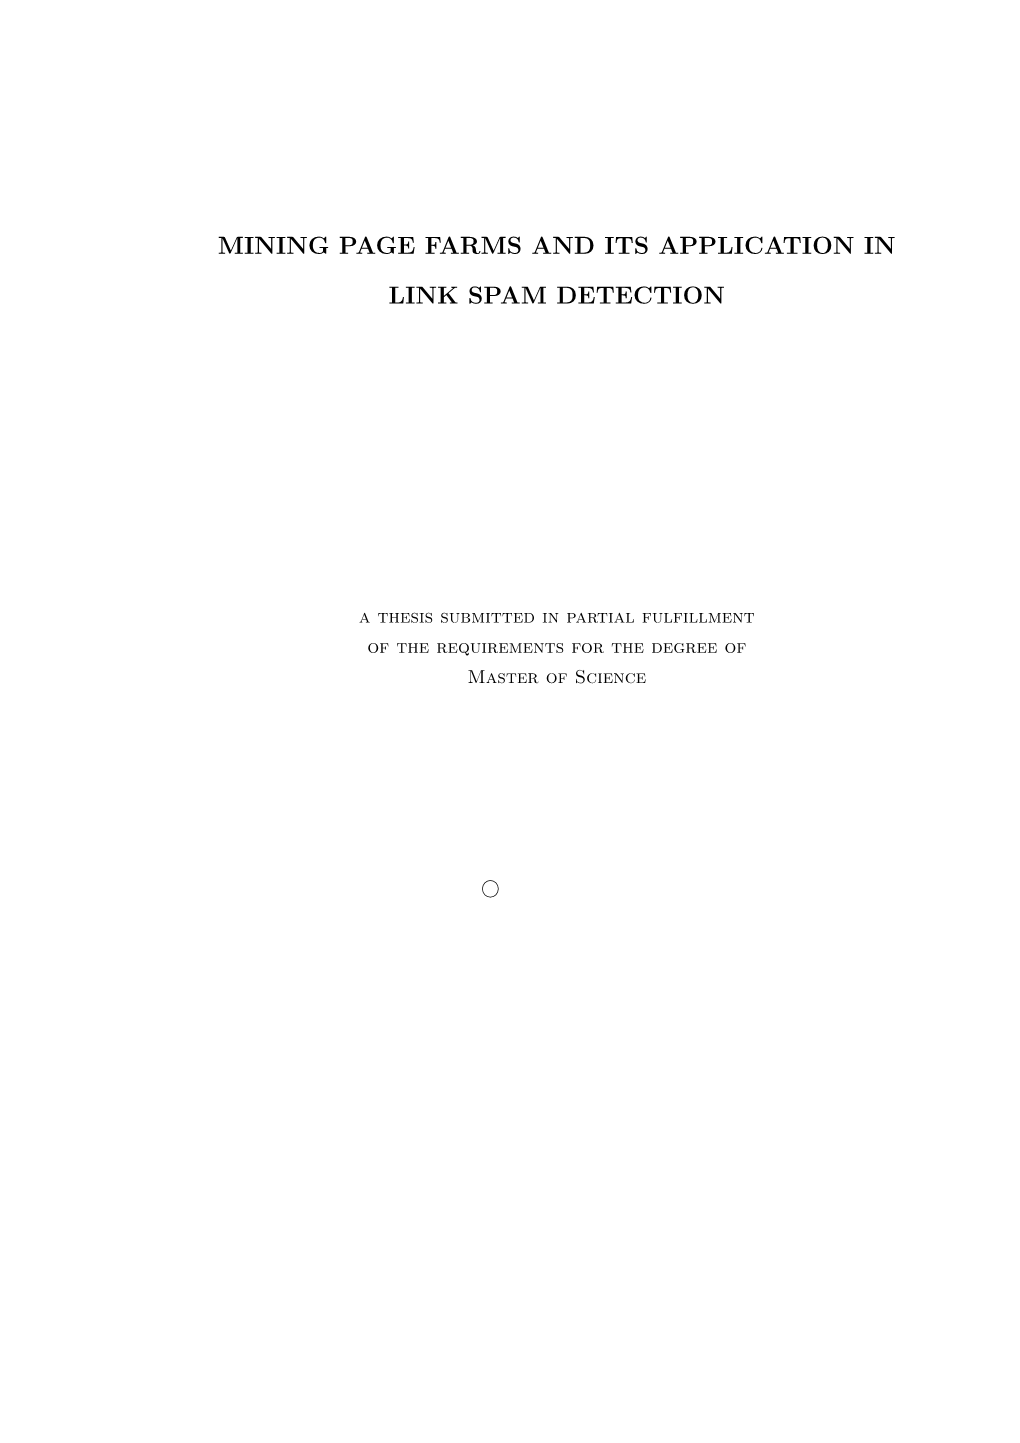 Mining Page Farms and Its Application in Link Spam Detec- Tion